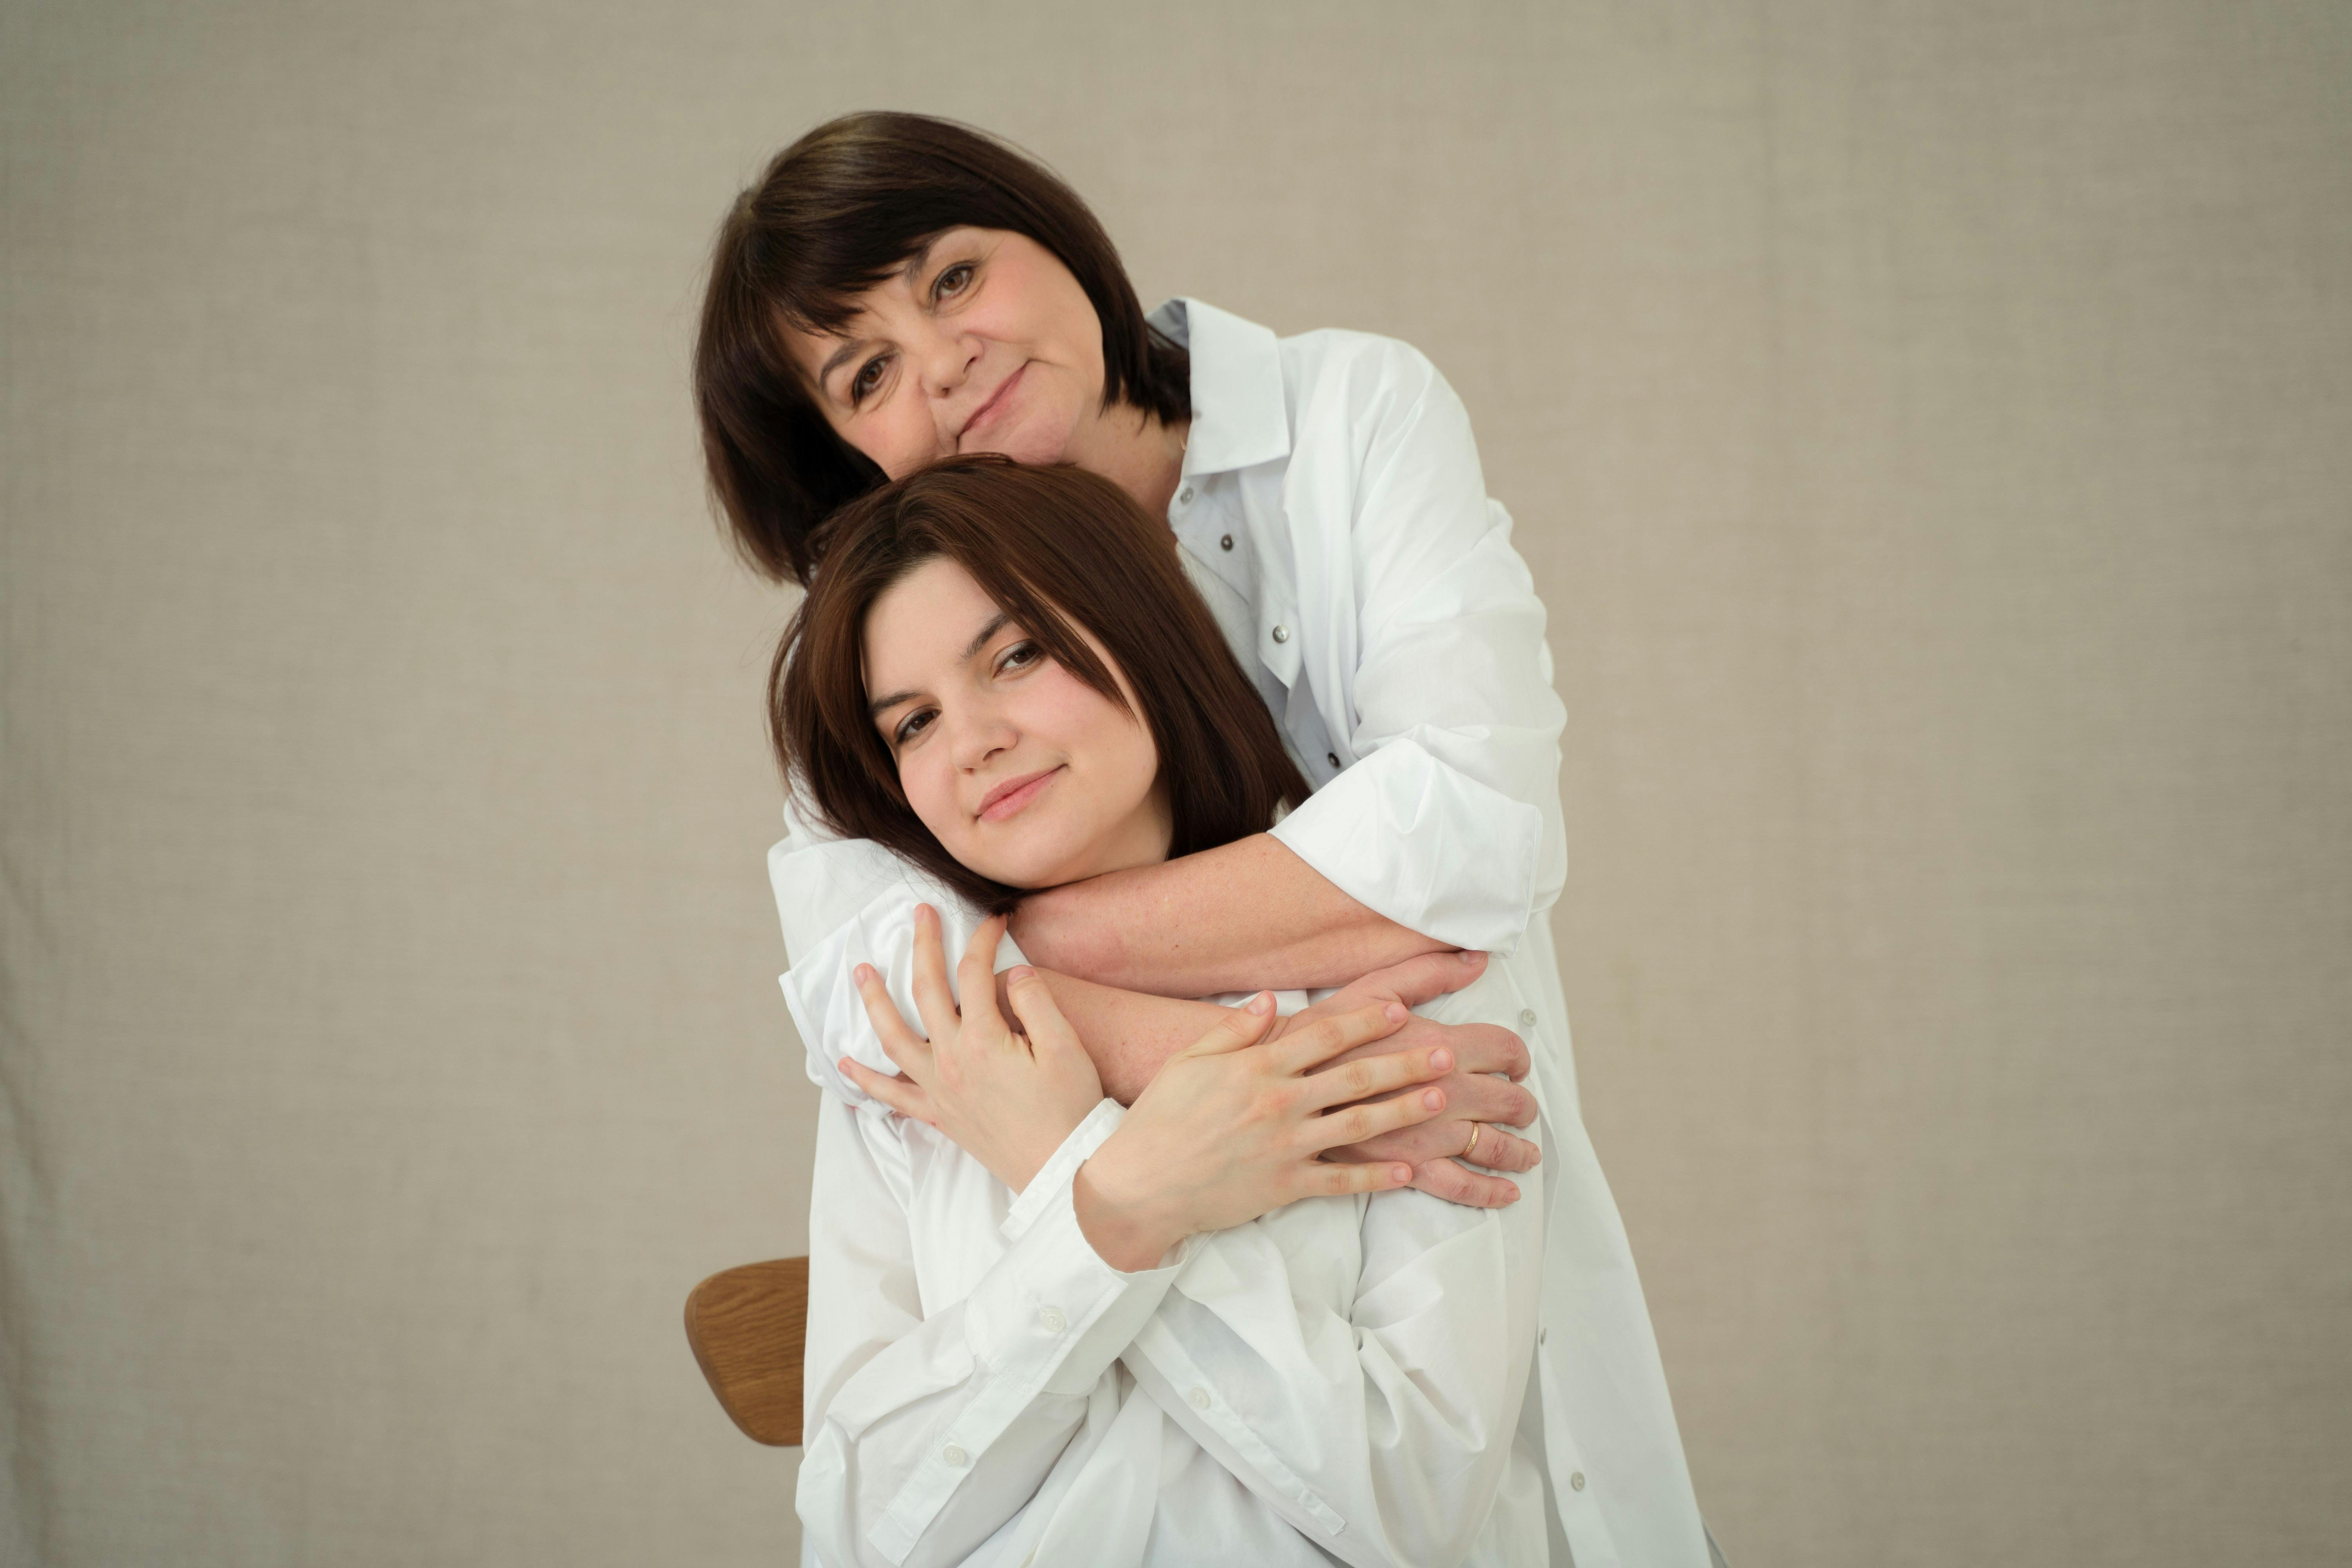 A mother embracing her daughter from behind | Source: Pexels